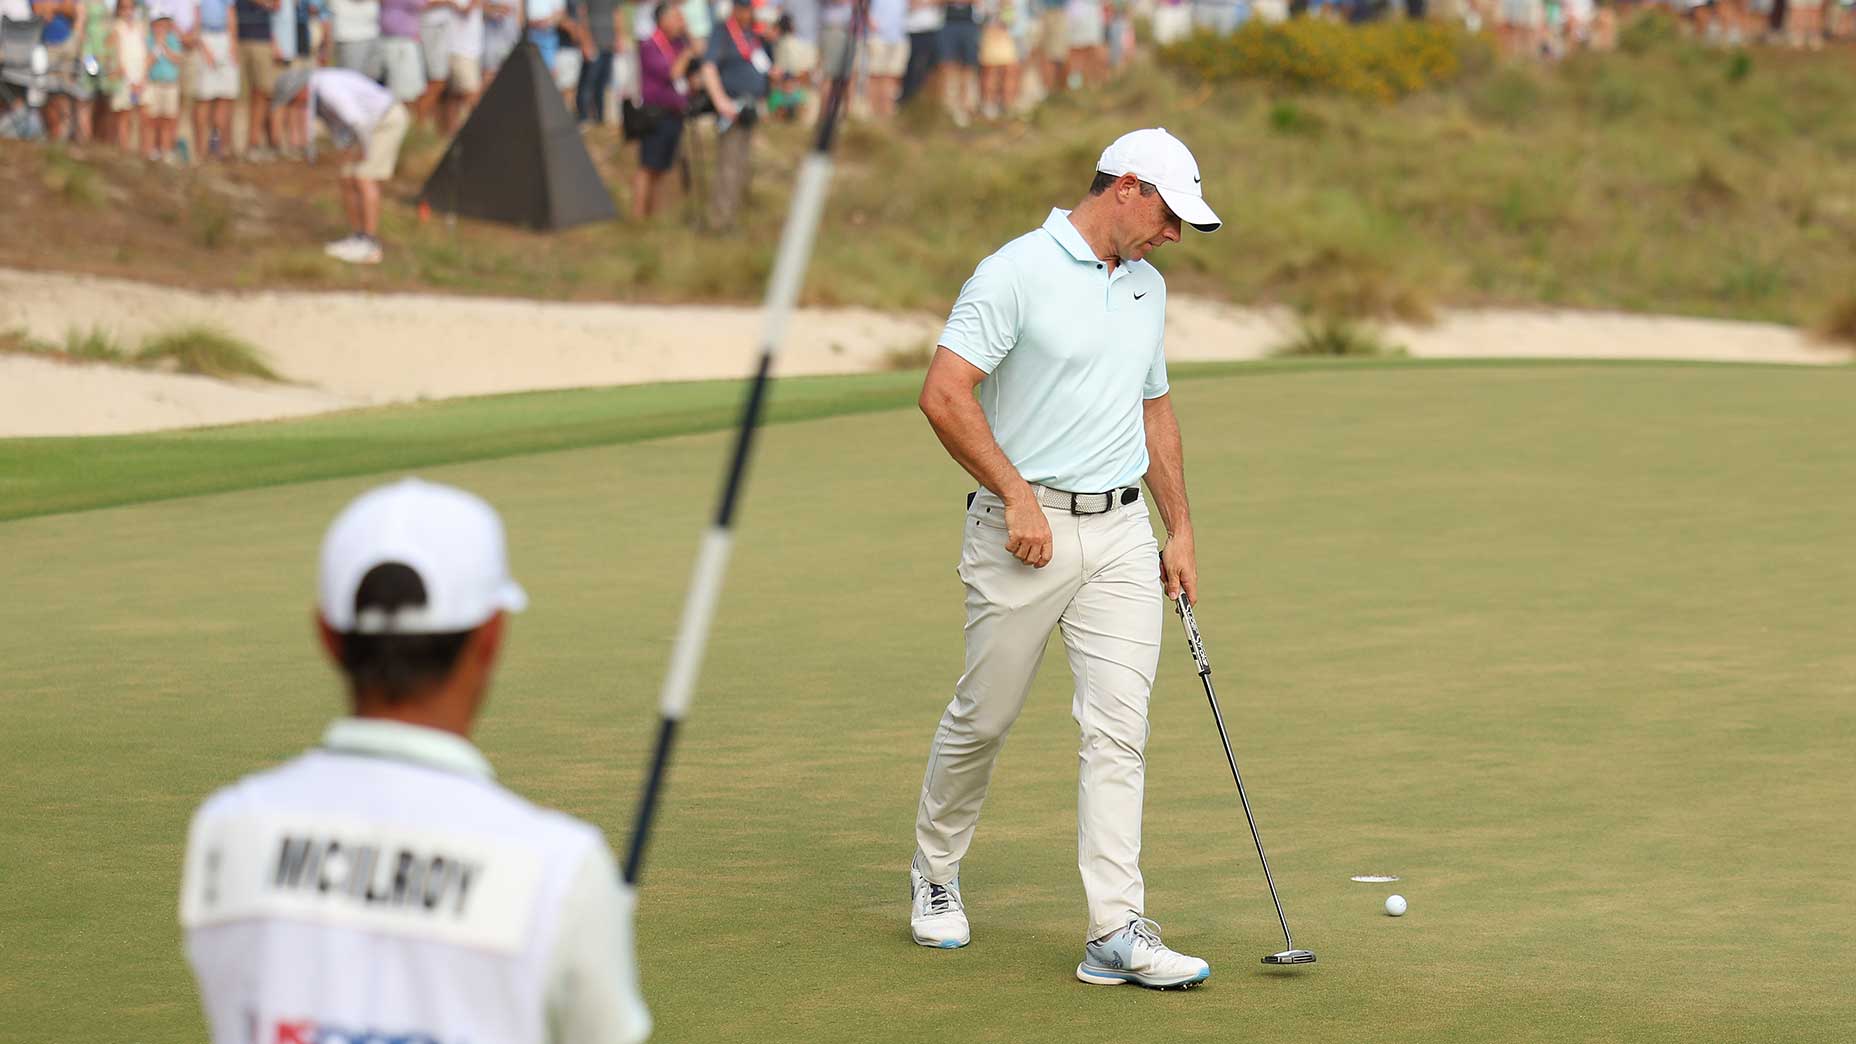 rory mcilroy reacts to a missed putt on the 18th green of the us open.